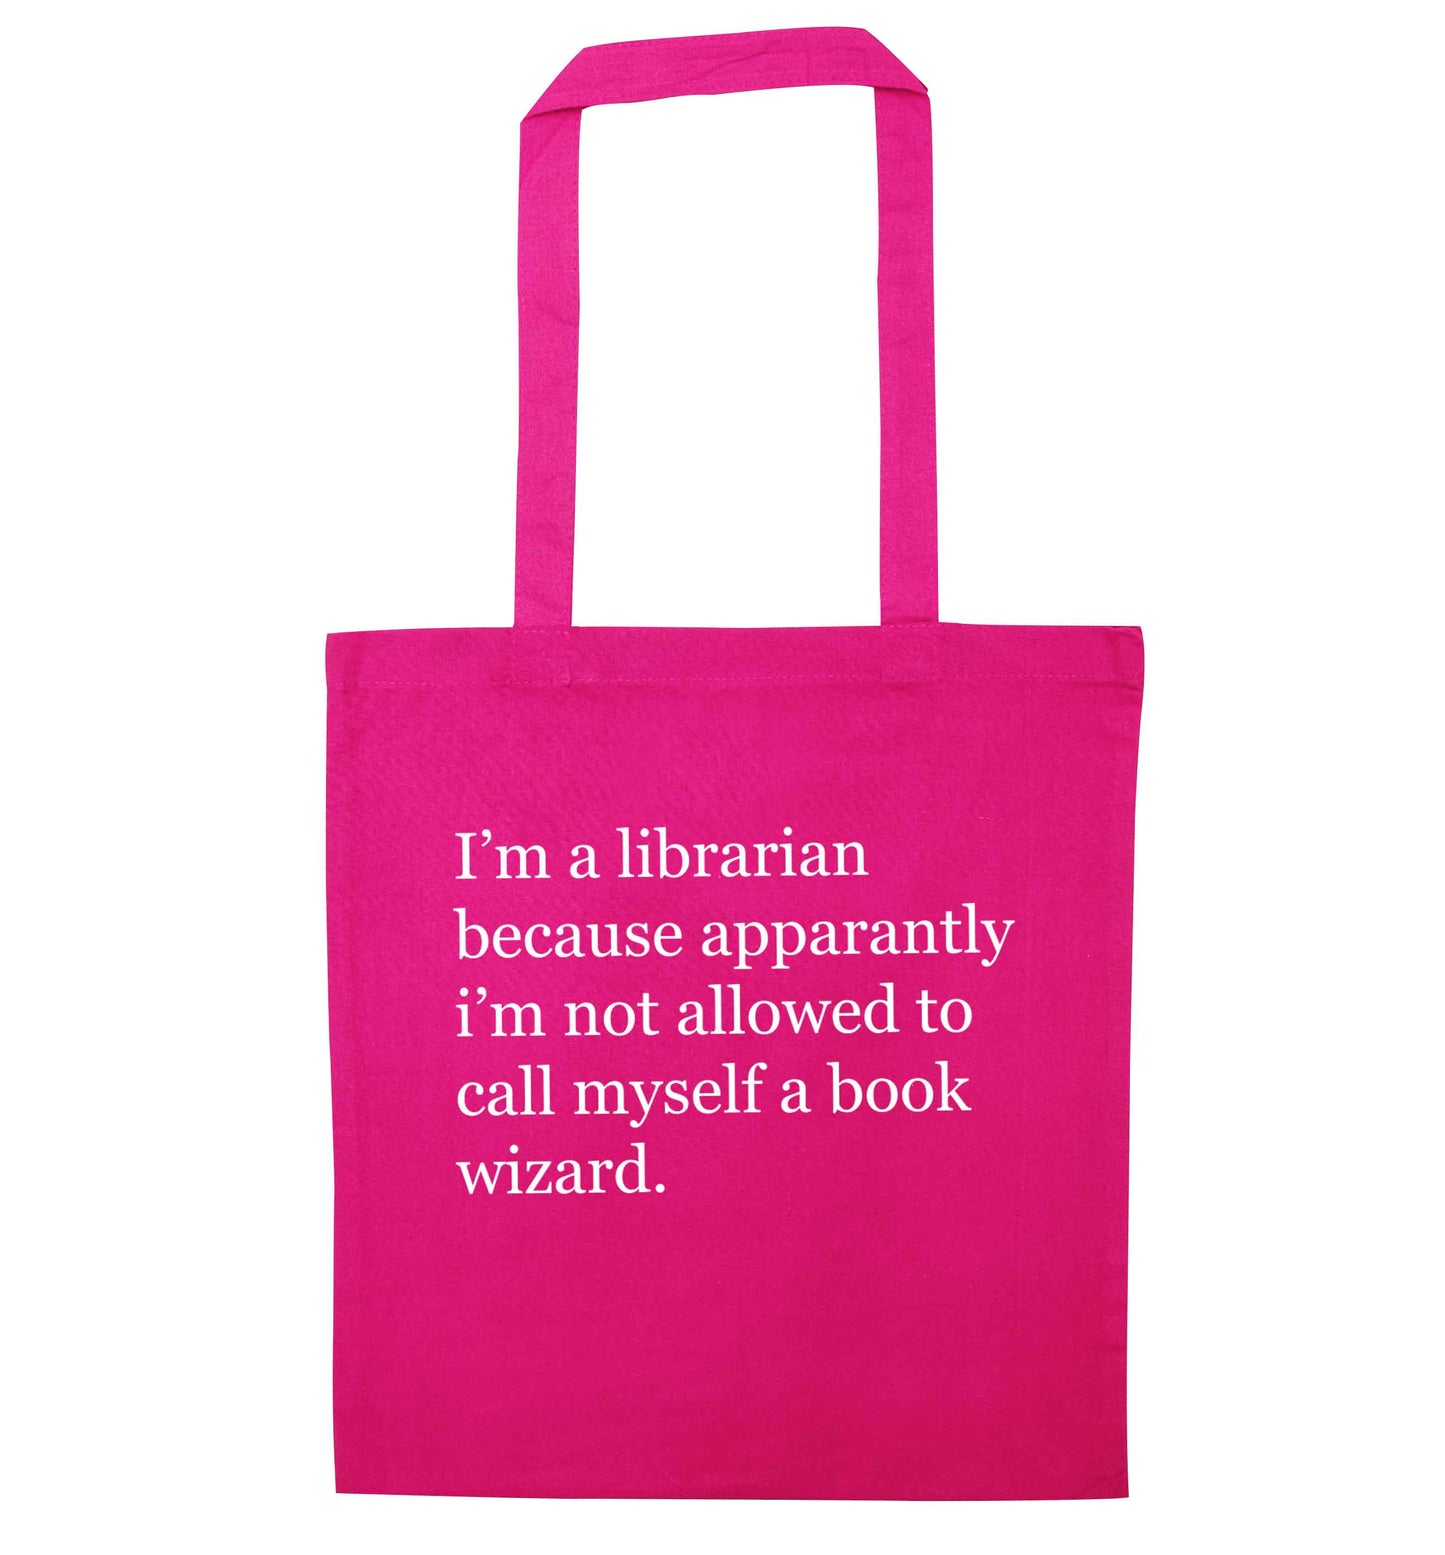 iÕm a librarian because apparantly iÕm not allowed to call myself a book wizard pink tote bag